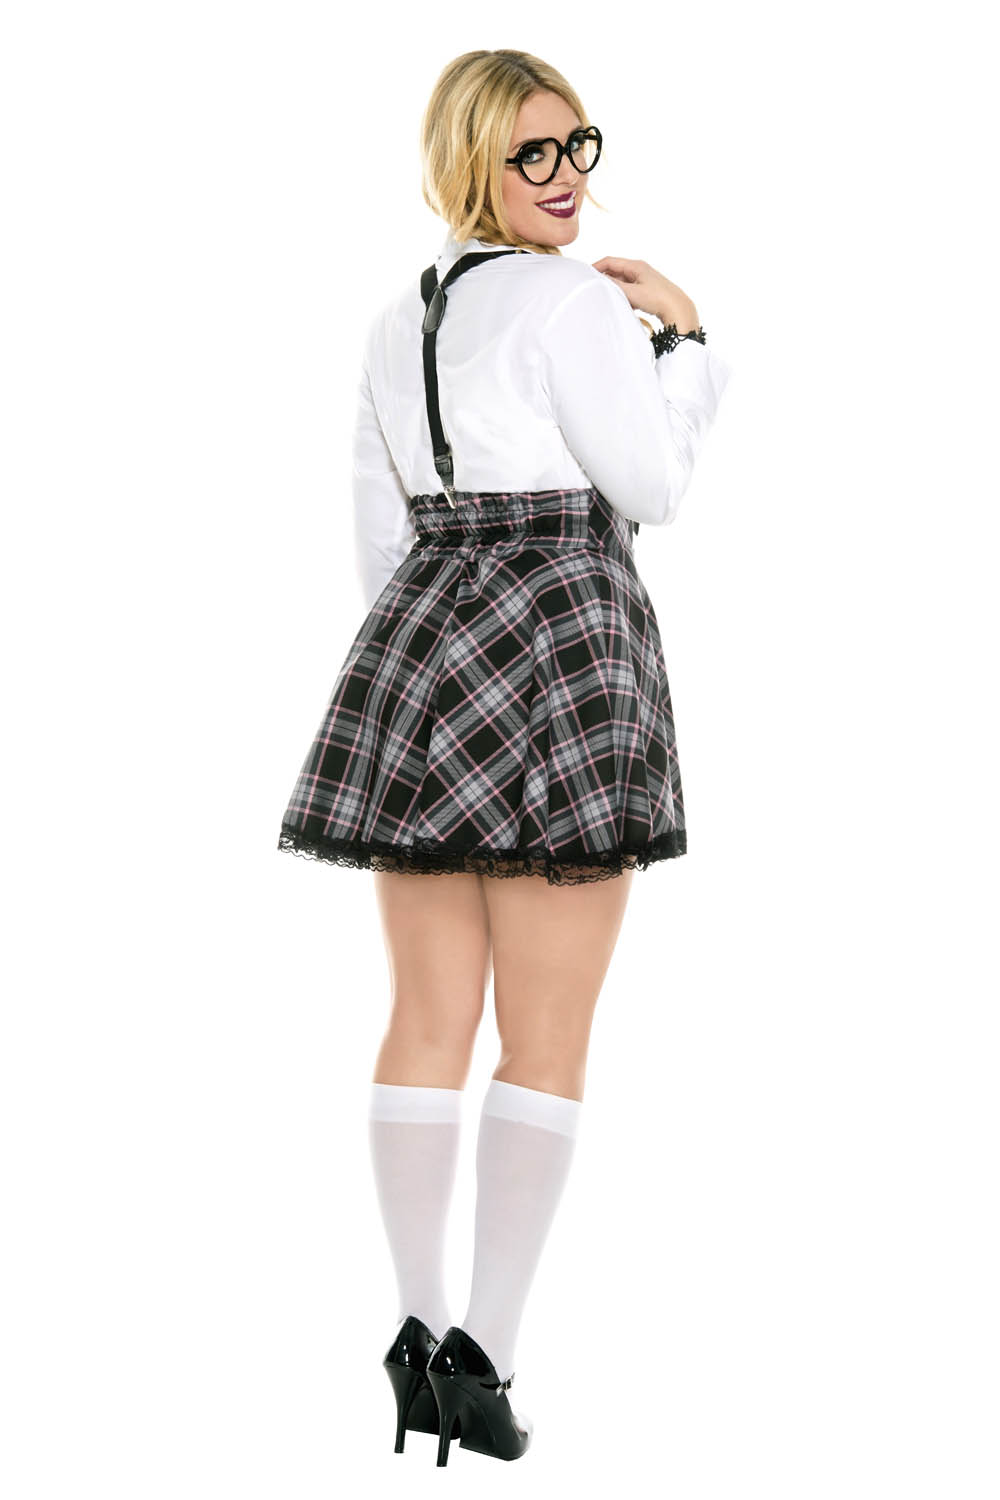 Adult Plus Size High Class Nerd Woman Costume 40 99 The Costume Land